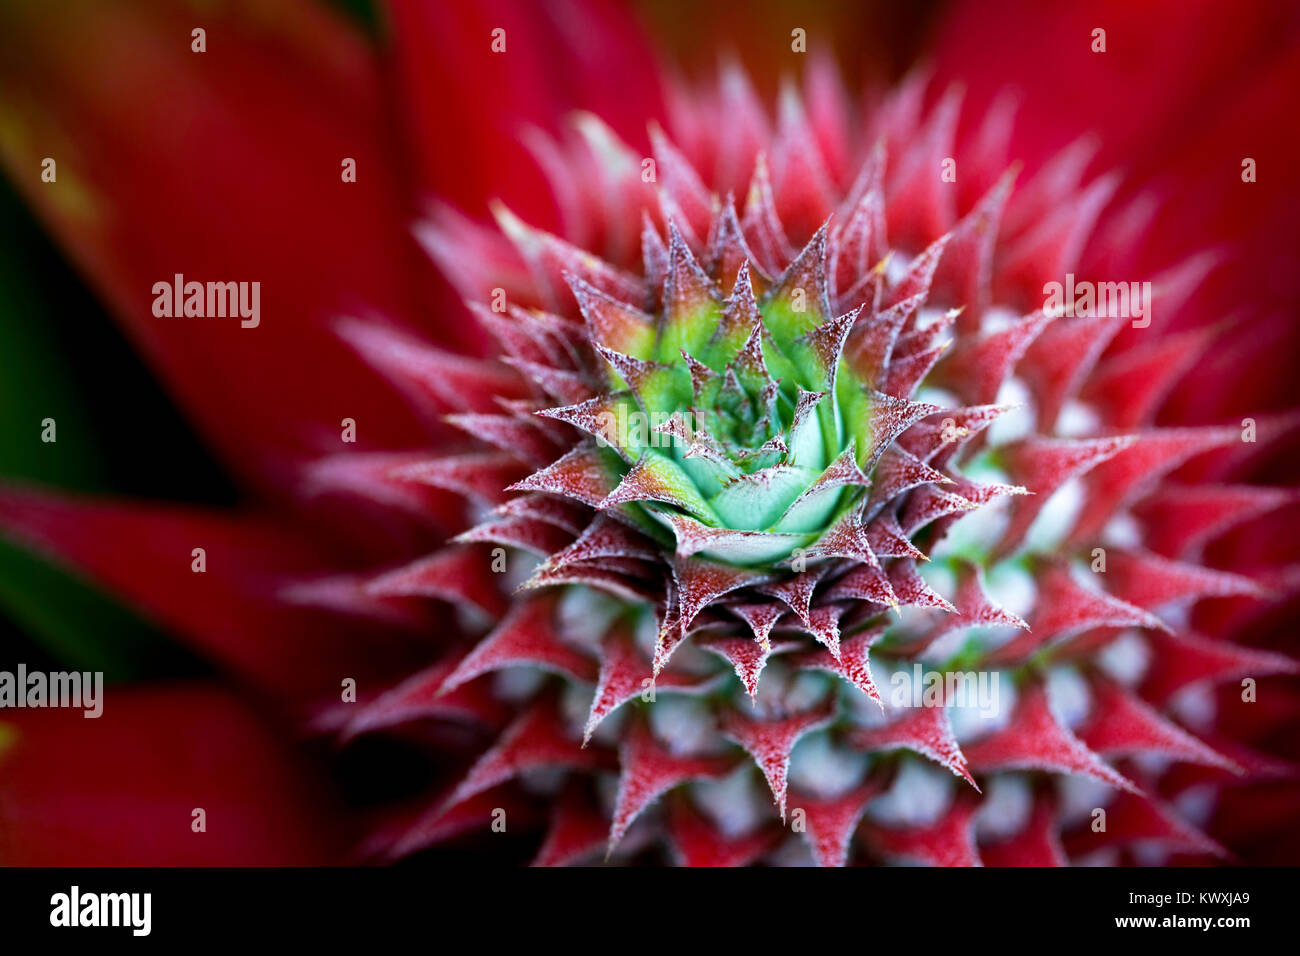 Exotic Red Pineapple Plant Stock Photo